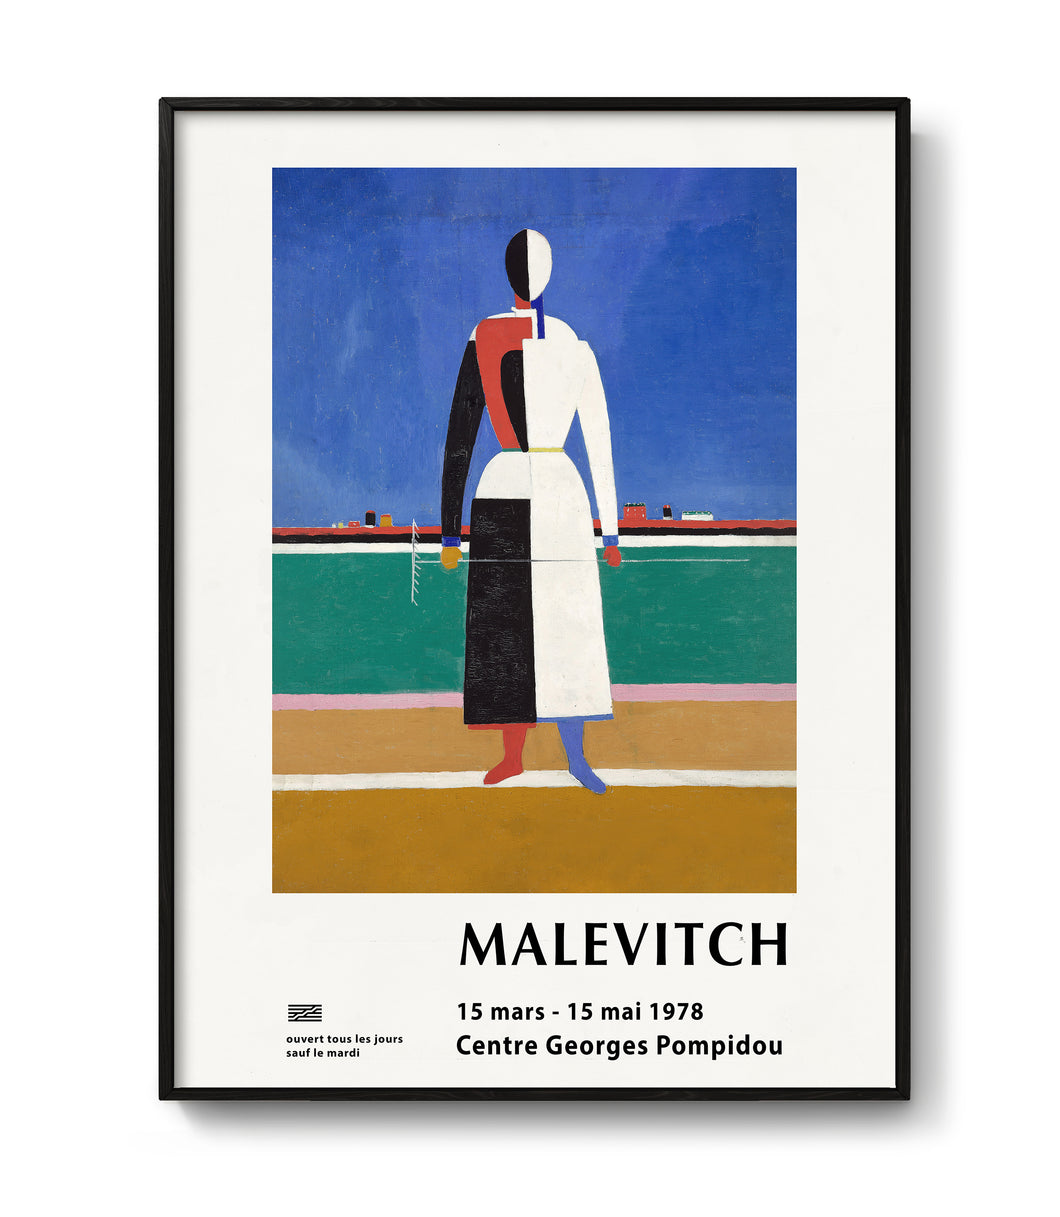 Exhibition poster by Malevich